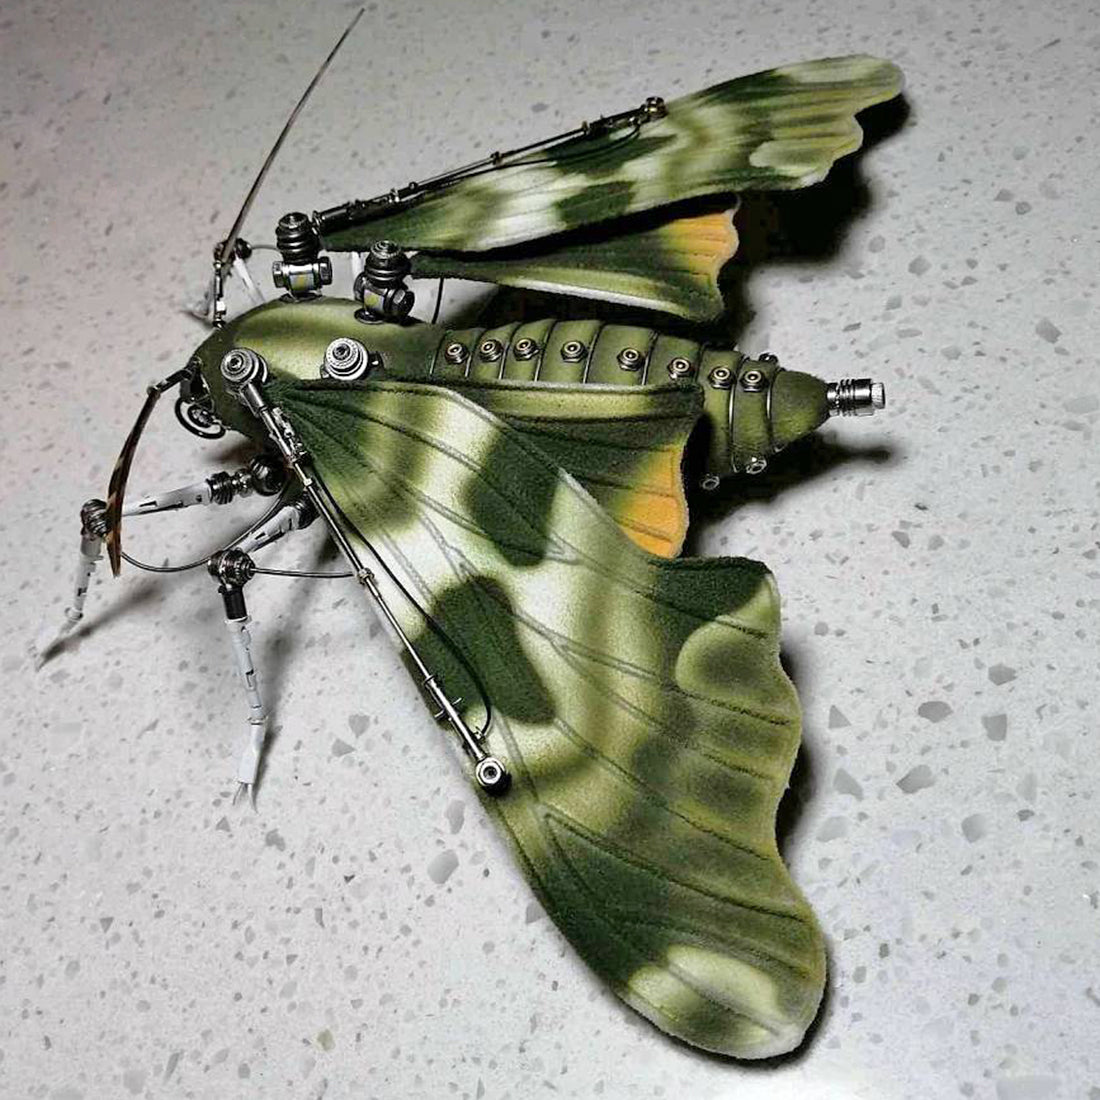 Metal Moire Hawkmoth Model Kits 3D Steampunk Bug Assembled Crafts for Home Decor